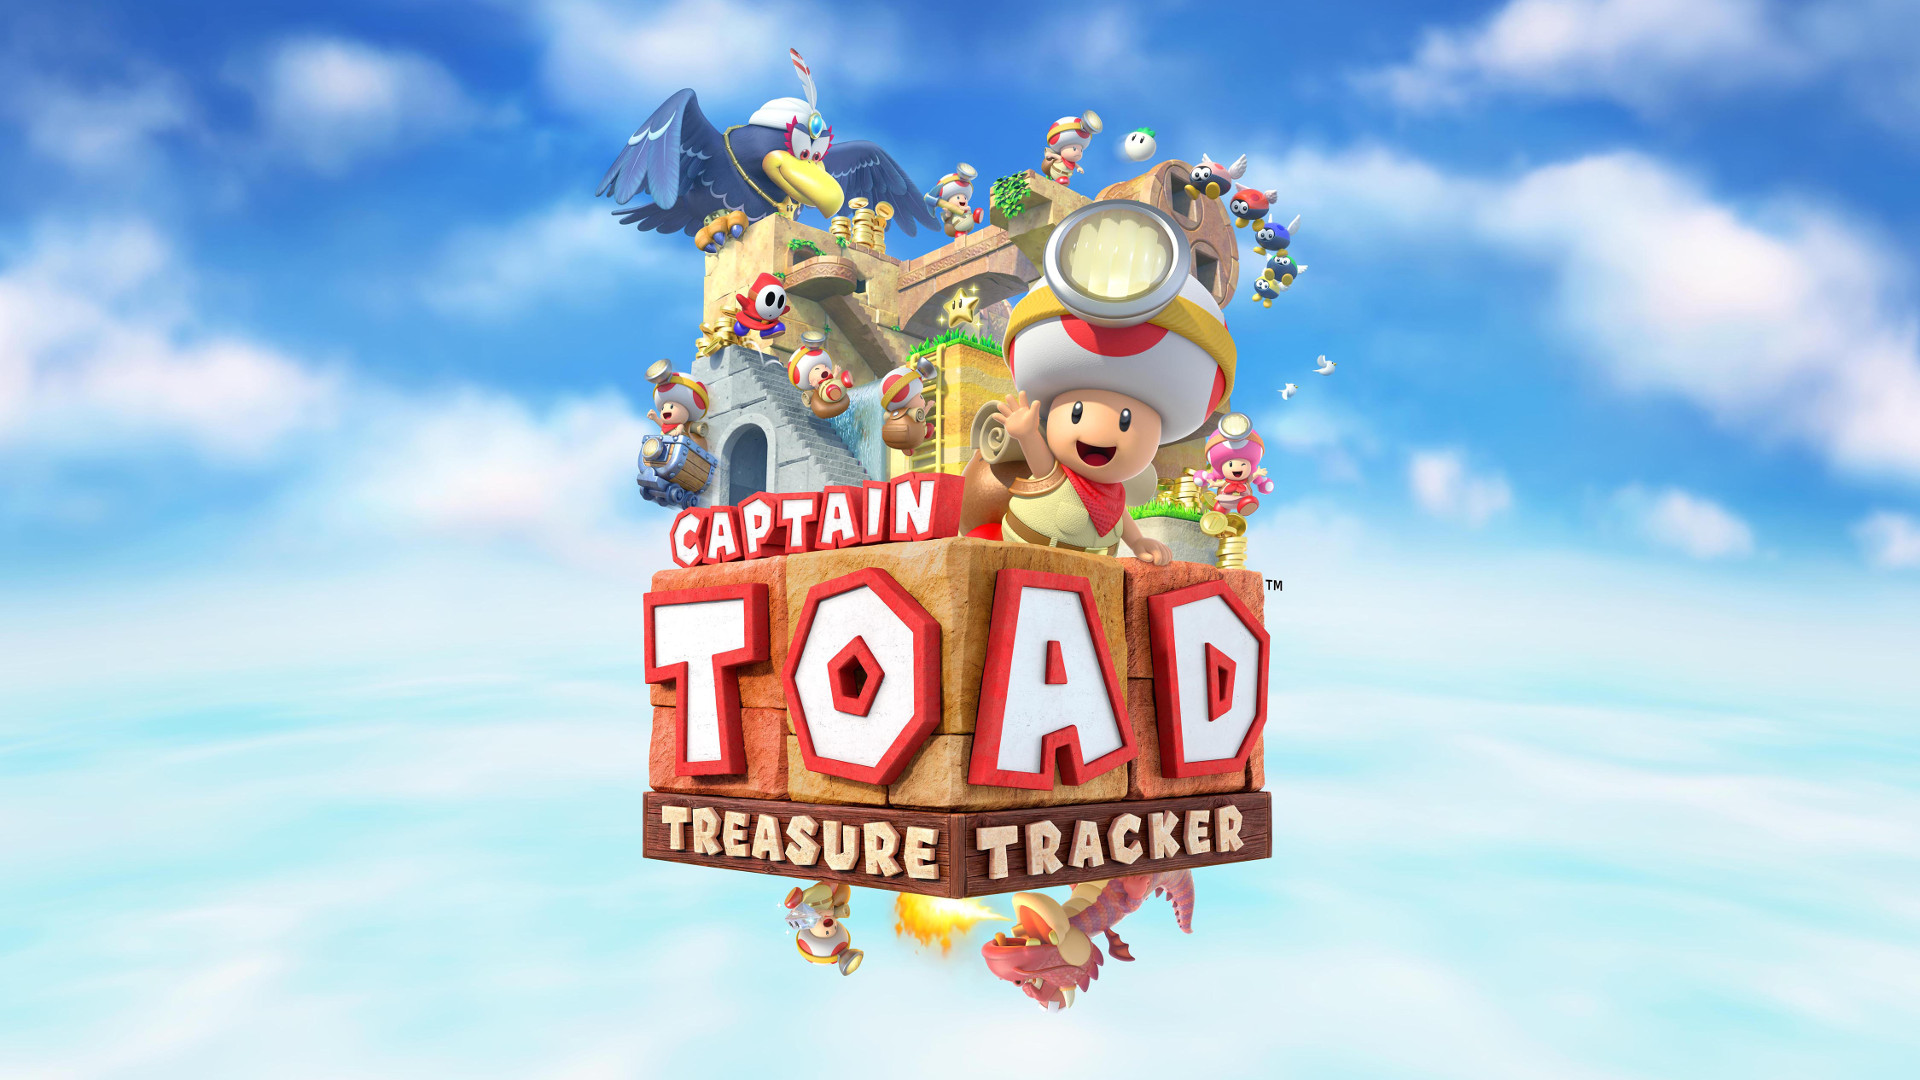 Video Game Captain Toad: Treasure Tracker HD Wallpaper | Background Image